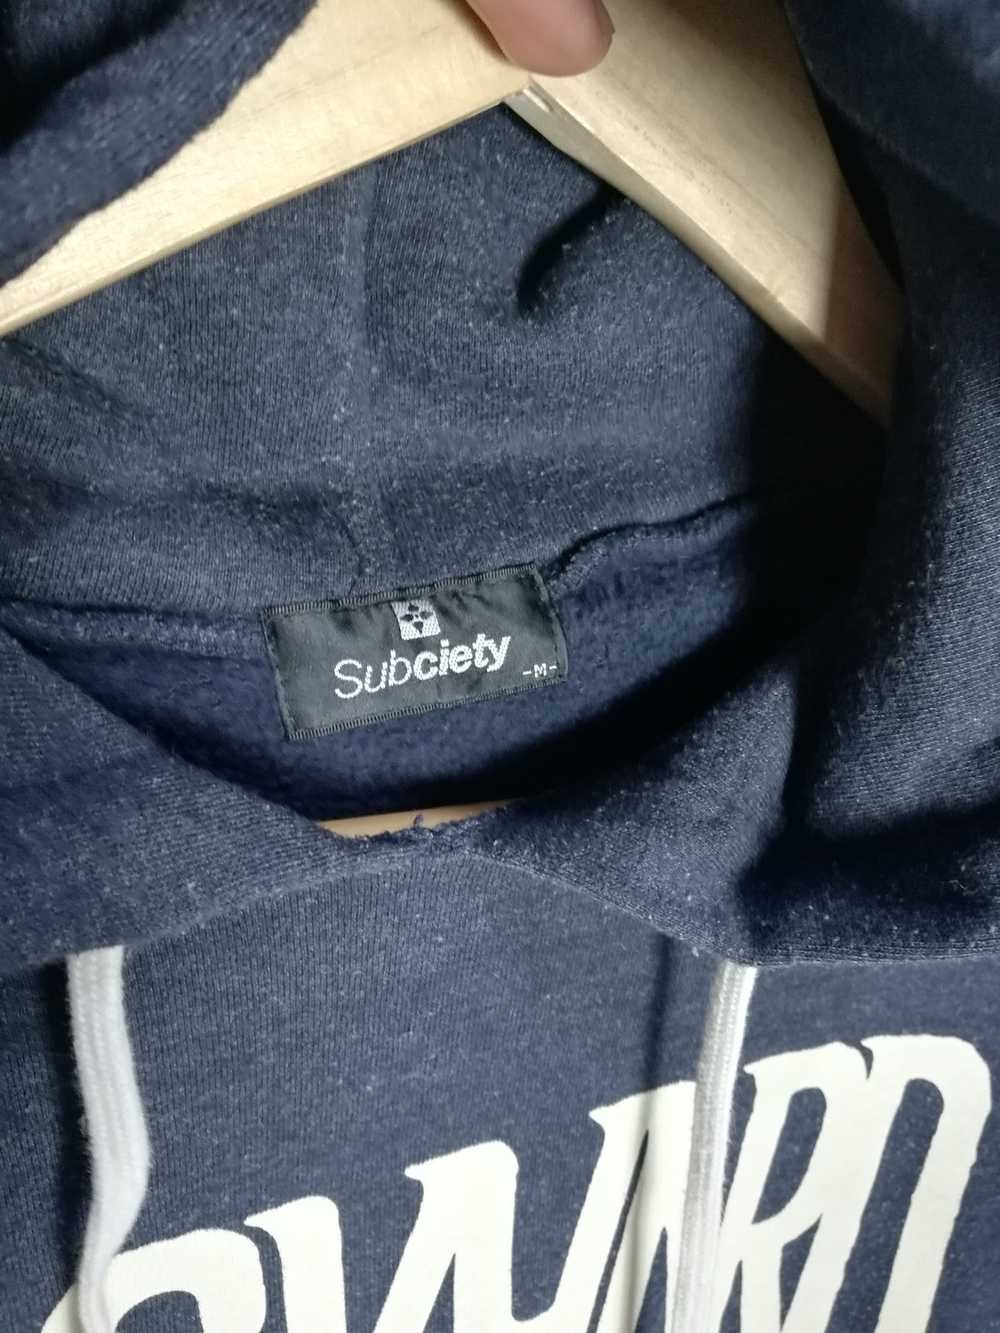 Japanese Brand backyard diary hoodie by subciety - image 2